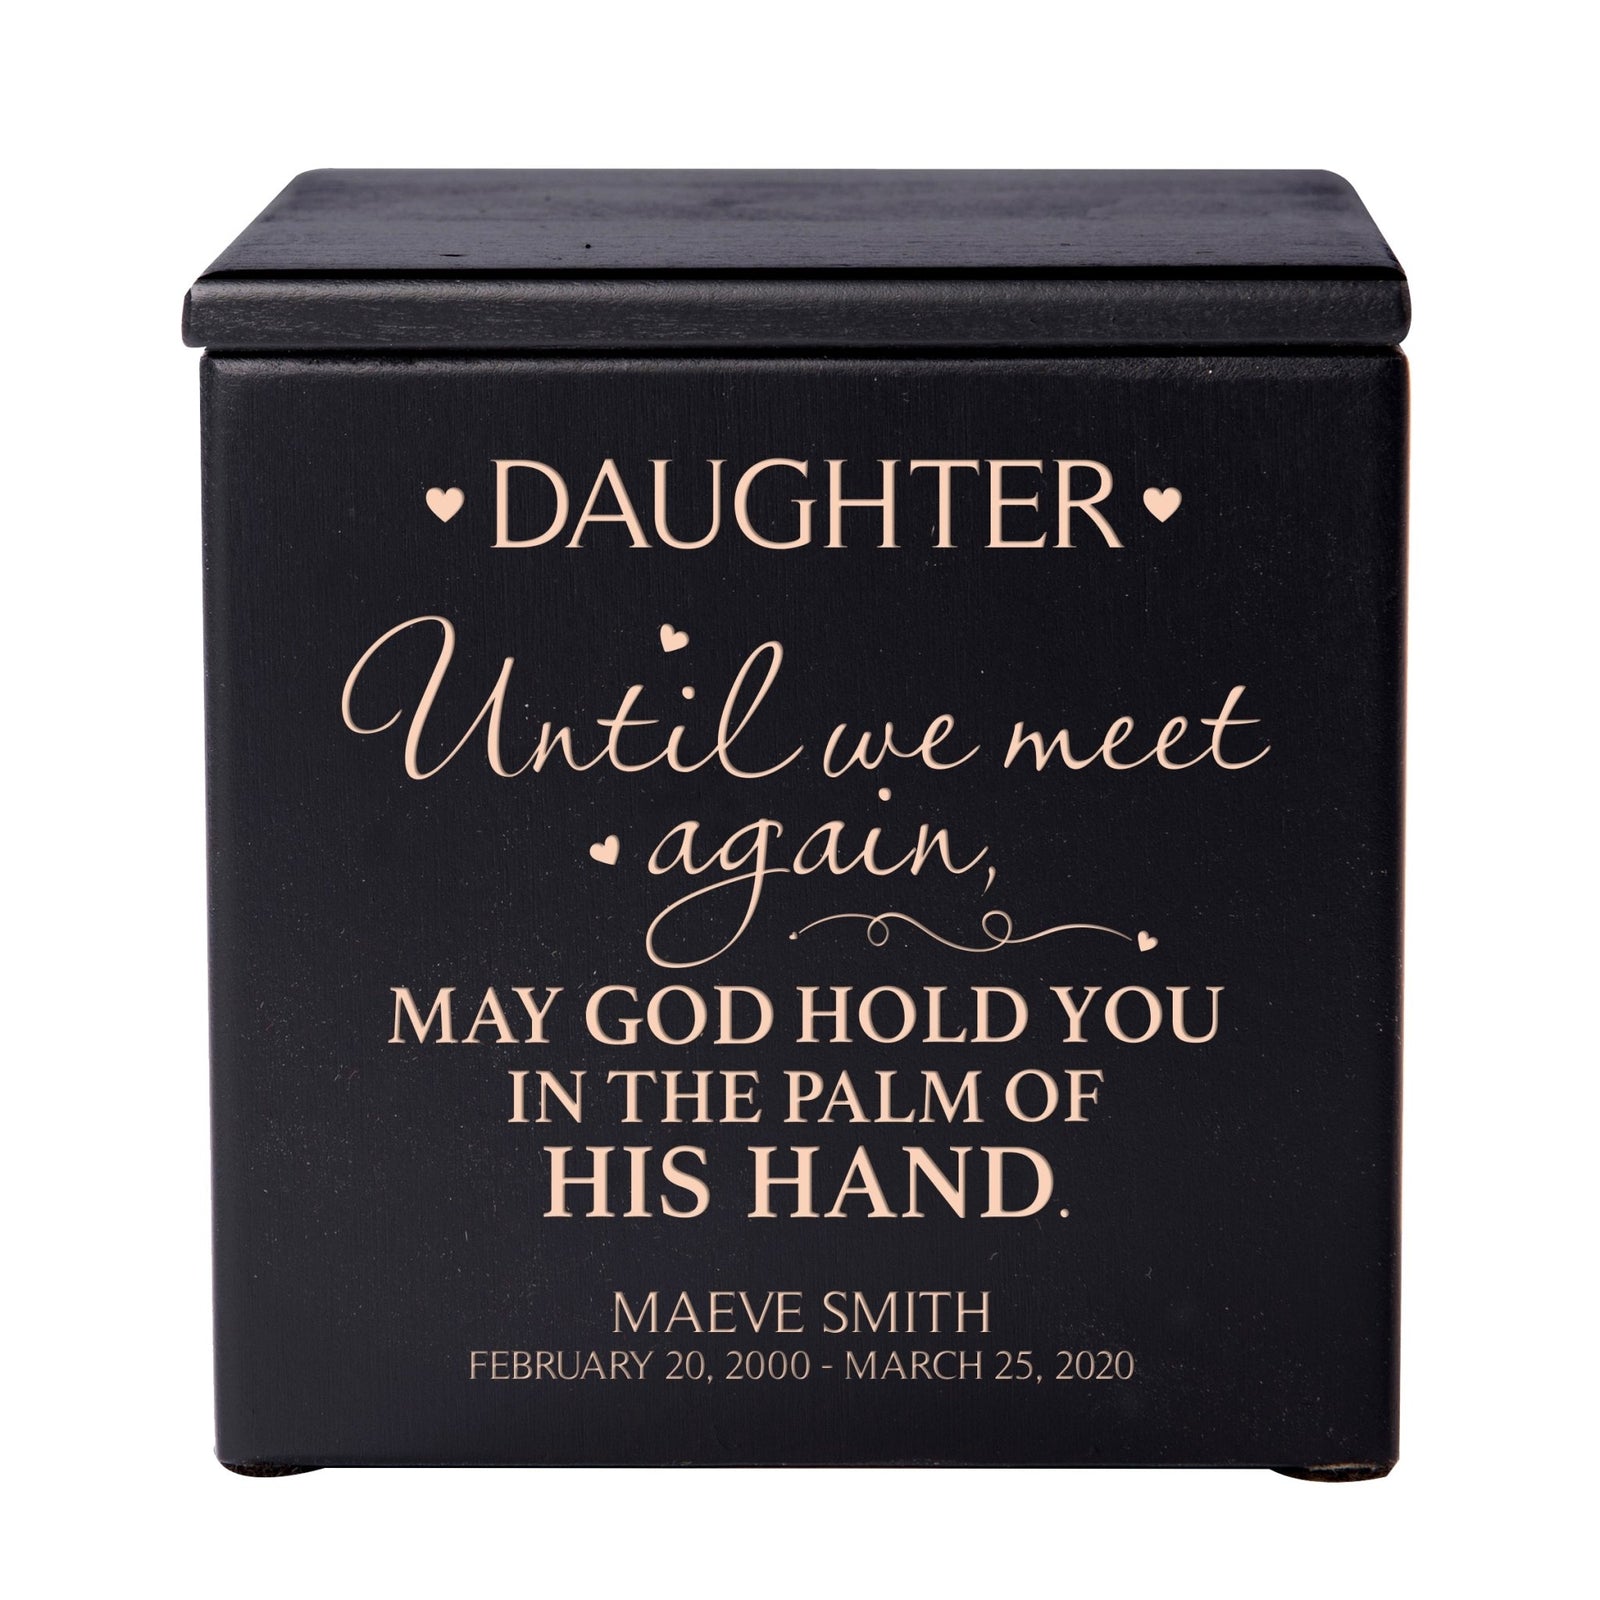 Custom Engraved Memorial 4.5x4.5in Cremation Urn Box Holds 49 Cu Inches Of Human Ashes (Until We Meet Again Daughter) Funeral and Condolence Keepsake - LifeSong Milestones